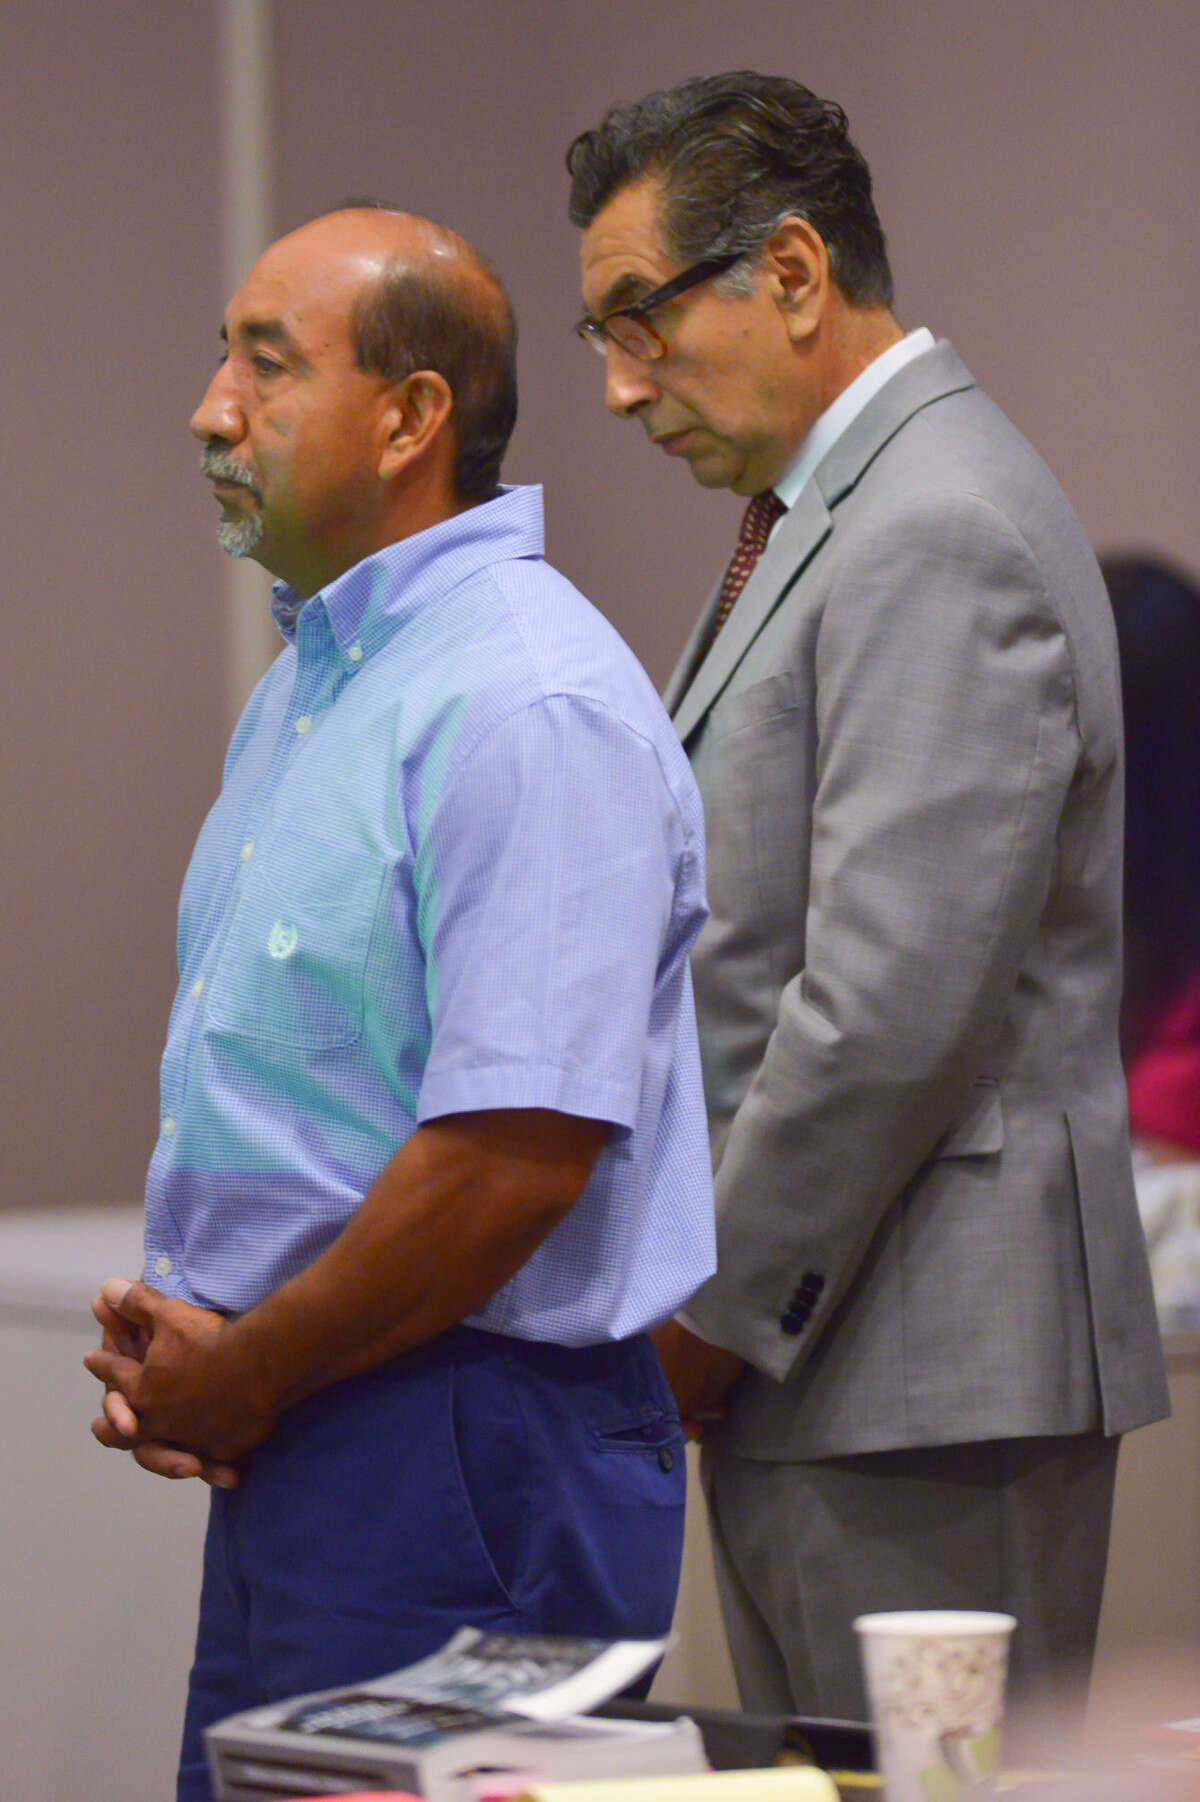 Adrian Perryman (left) stands with his attorney Tony Jimenez at the start of his trial.